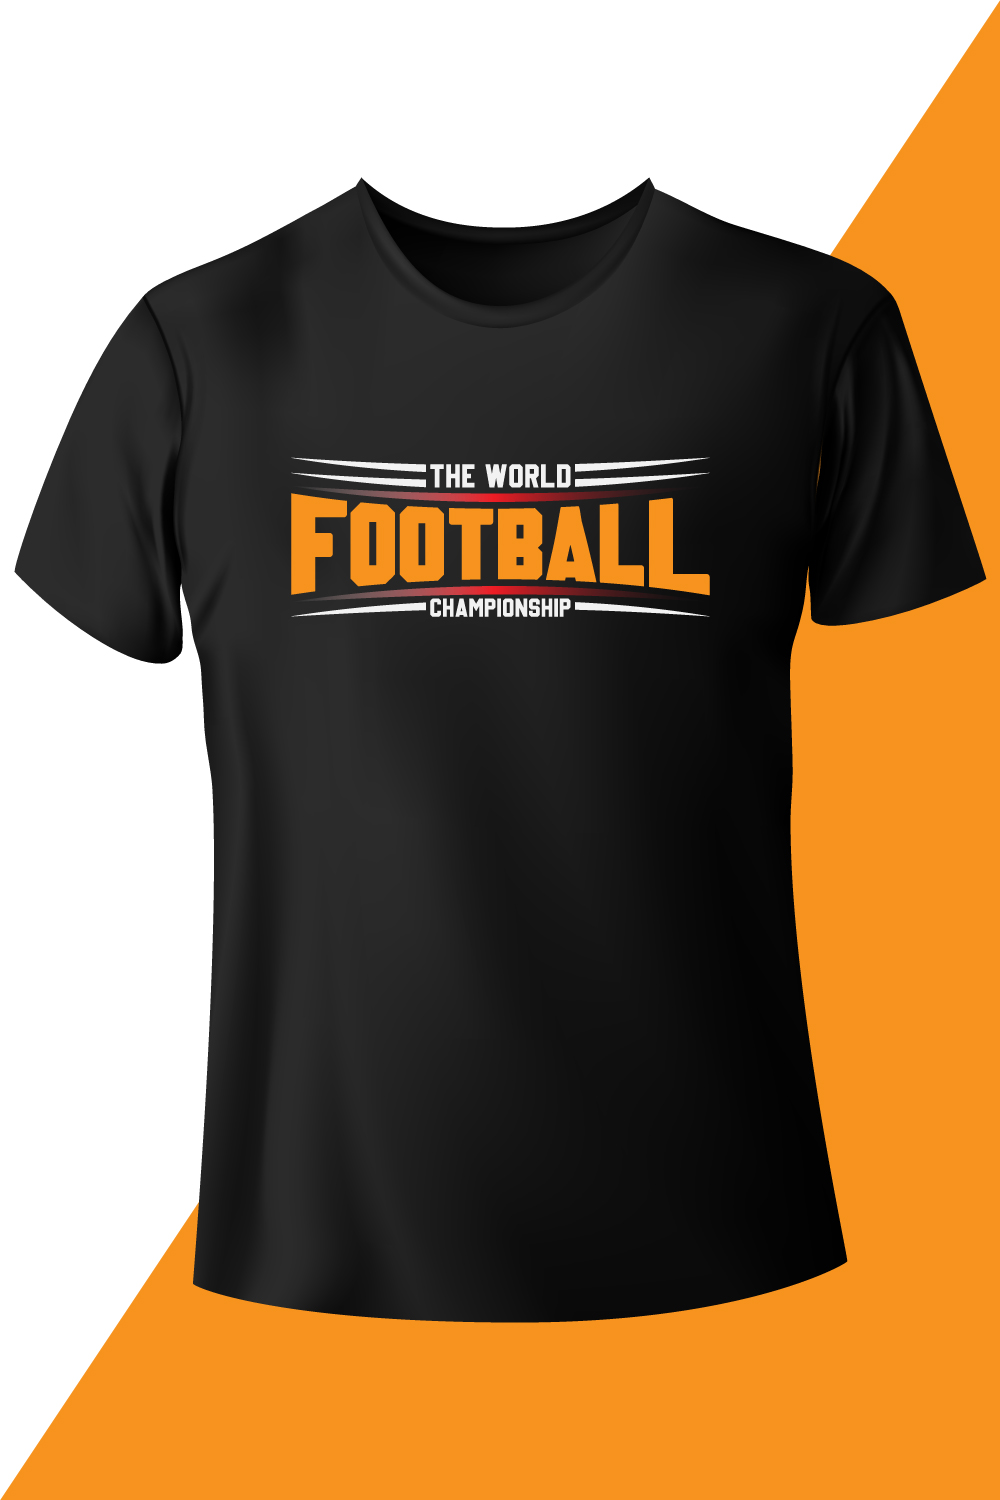 The image of a black t-shirt with a beautiful inscription the world football champions.